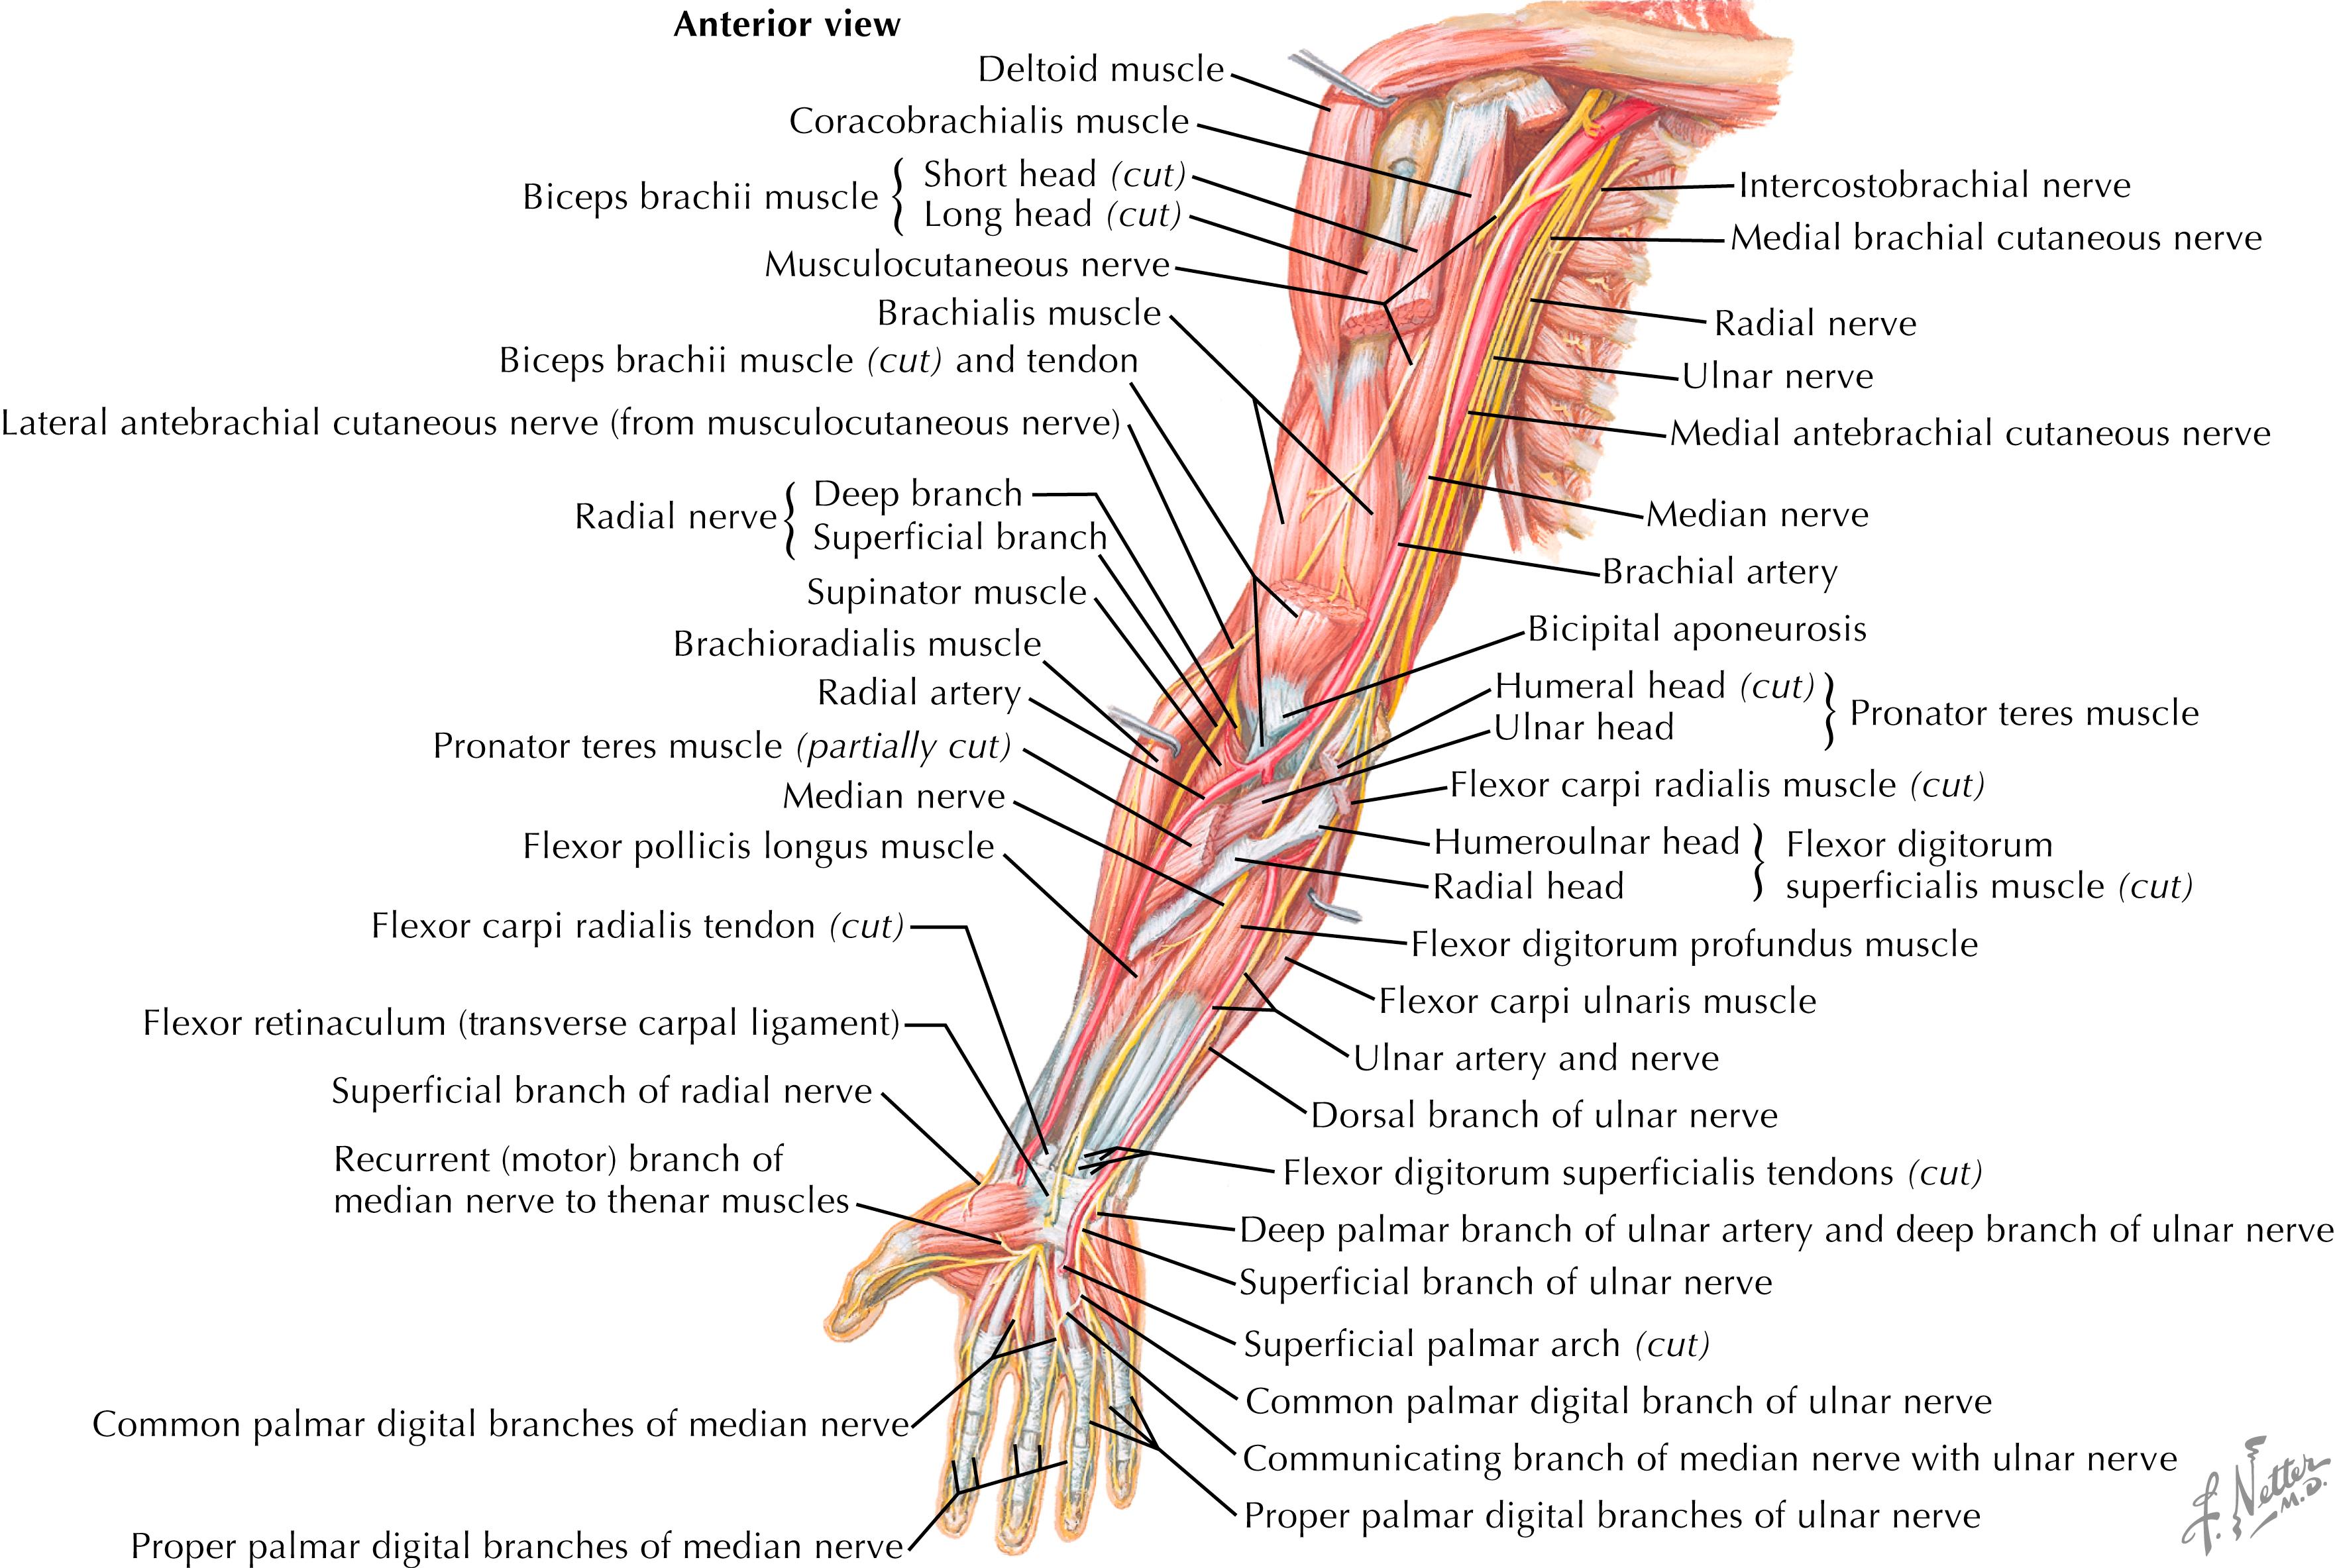 Figure 50.2, Nerves of the upper extremity.